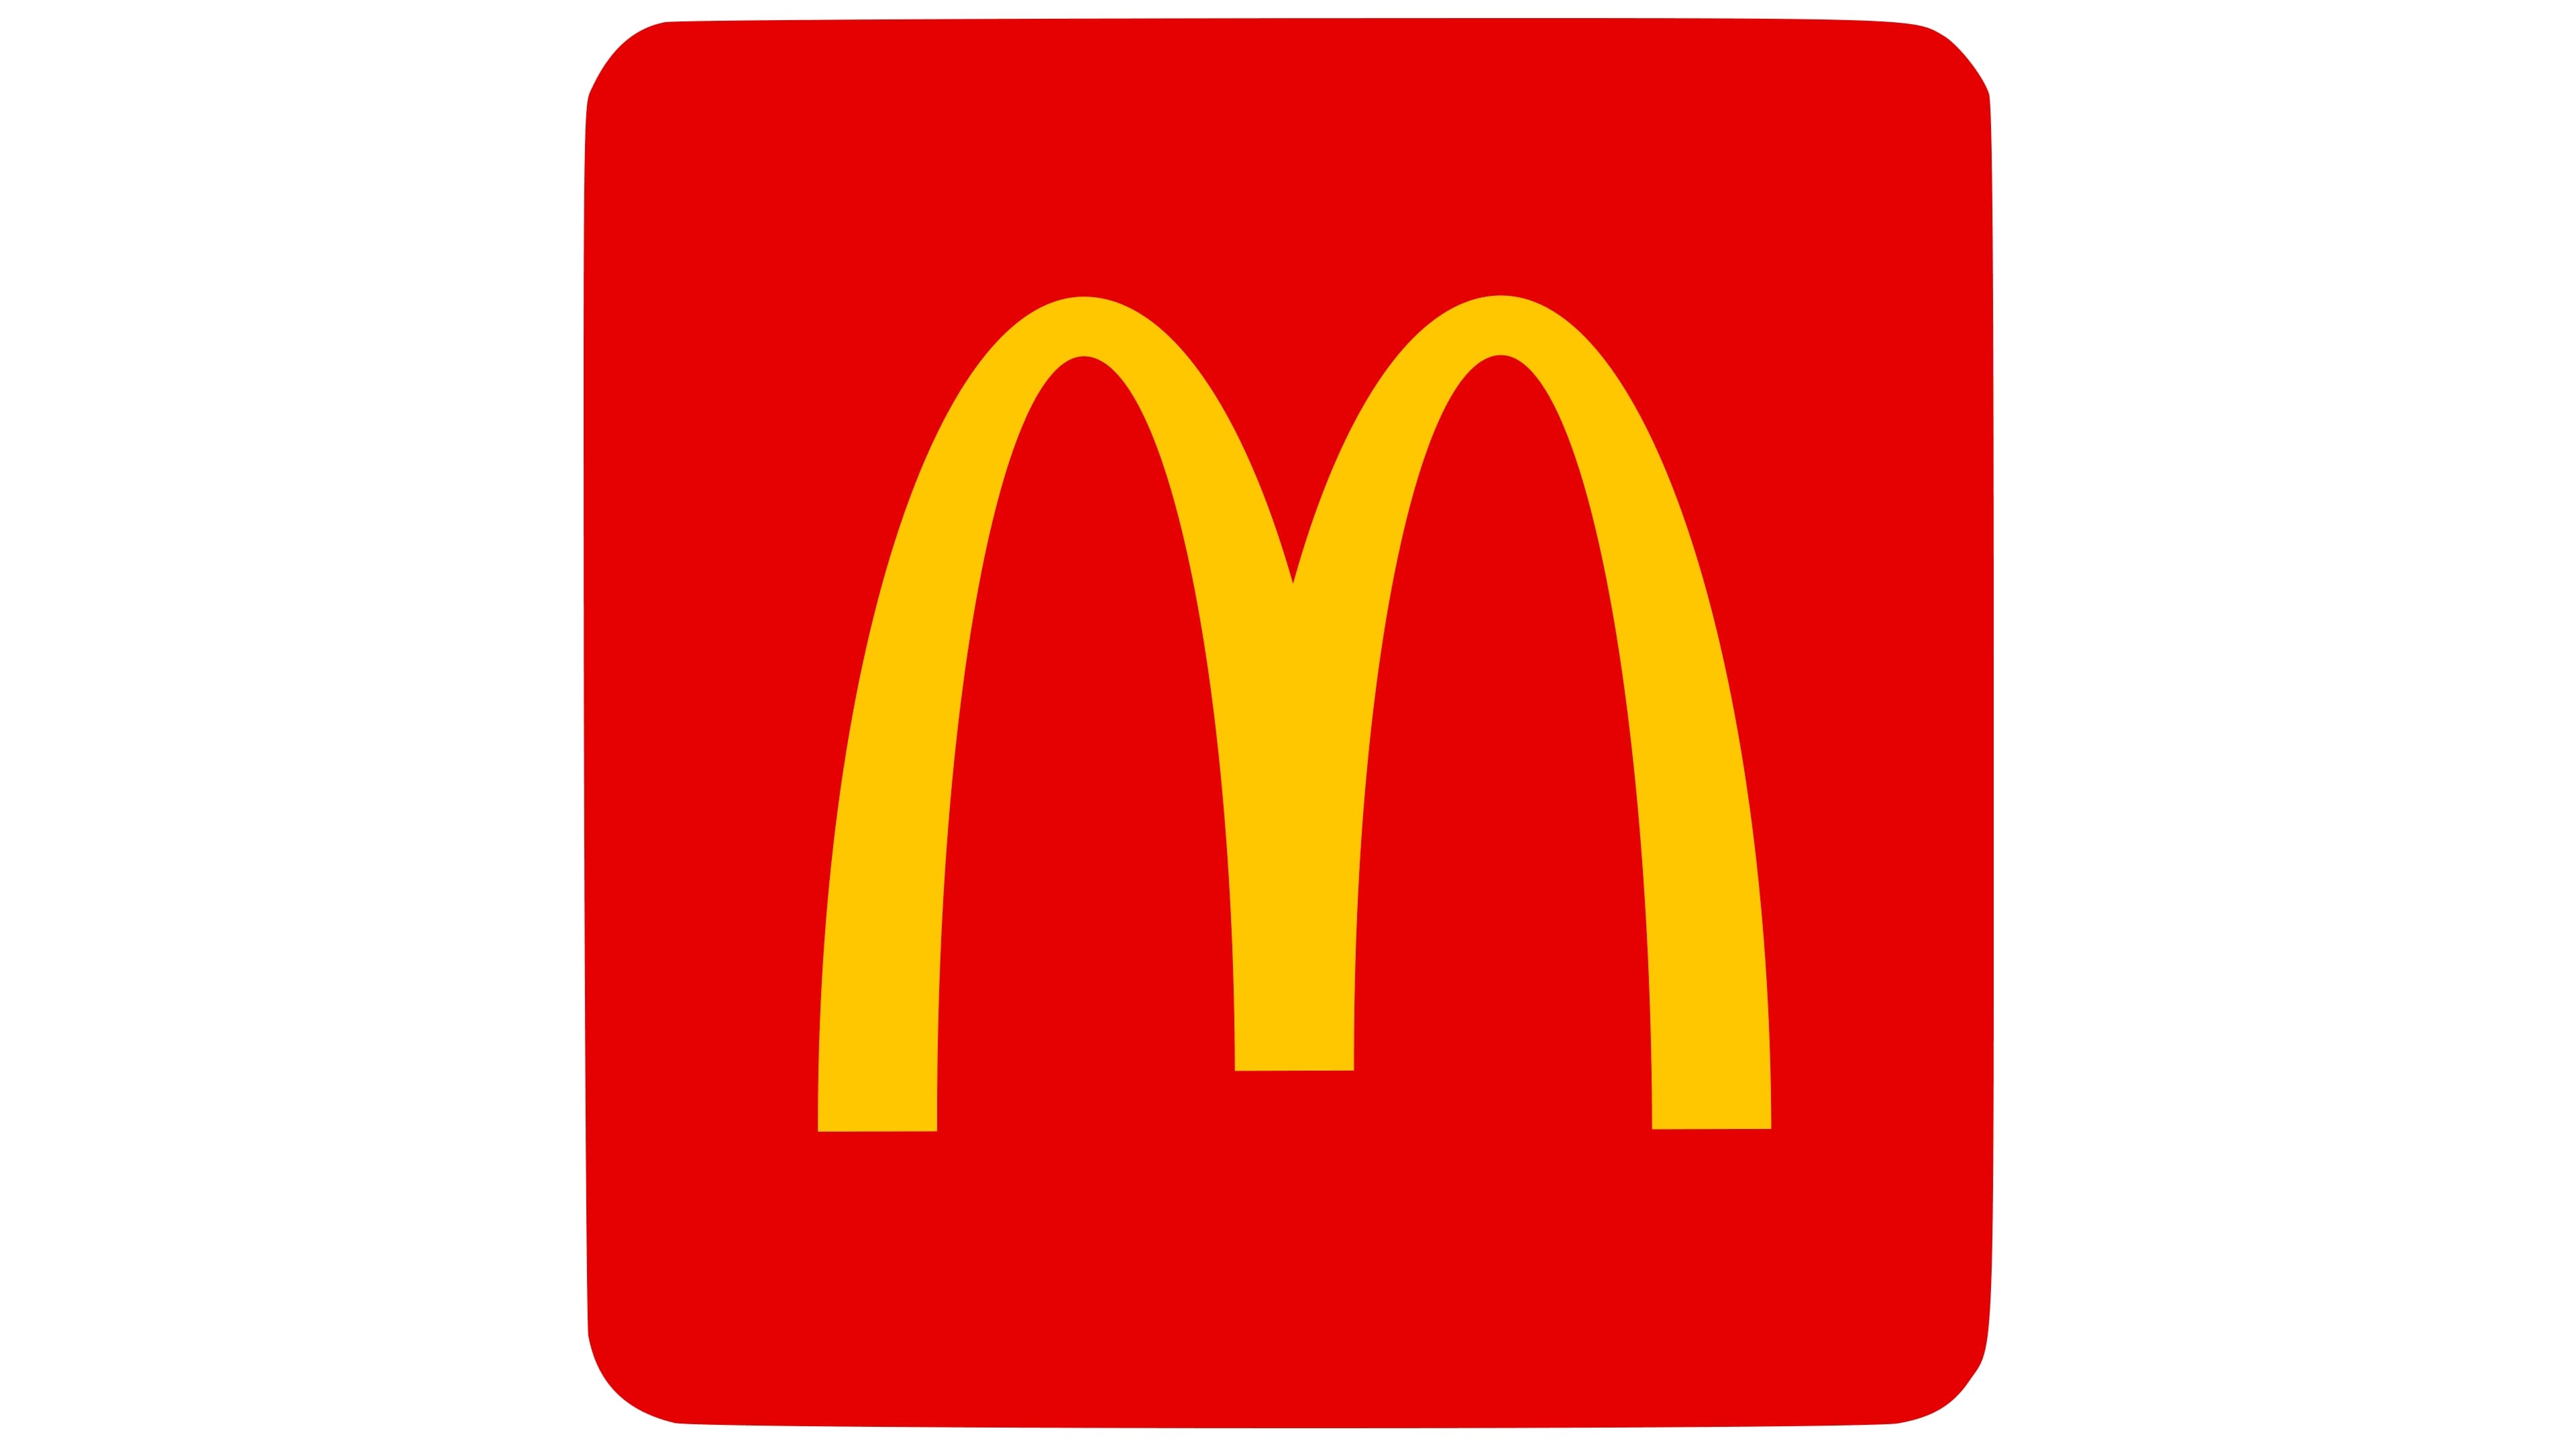 McDonald\'s Logo and symbol, meaning, history, PNG, brand